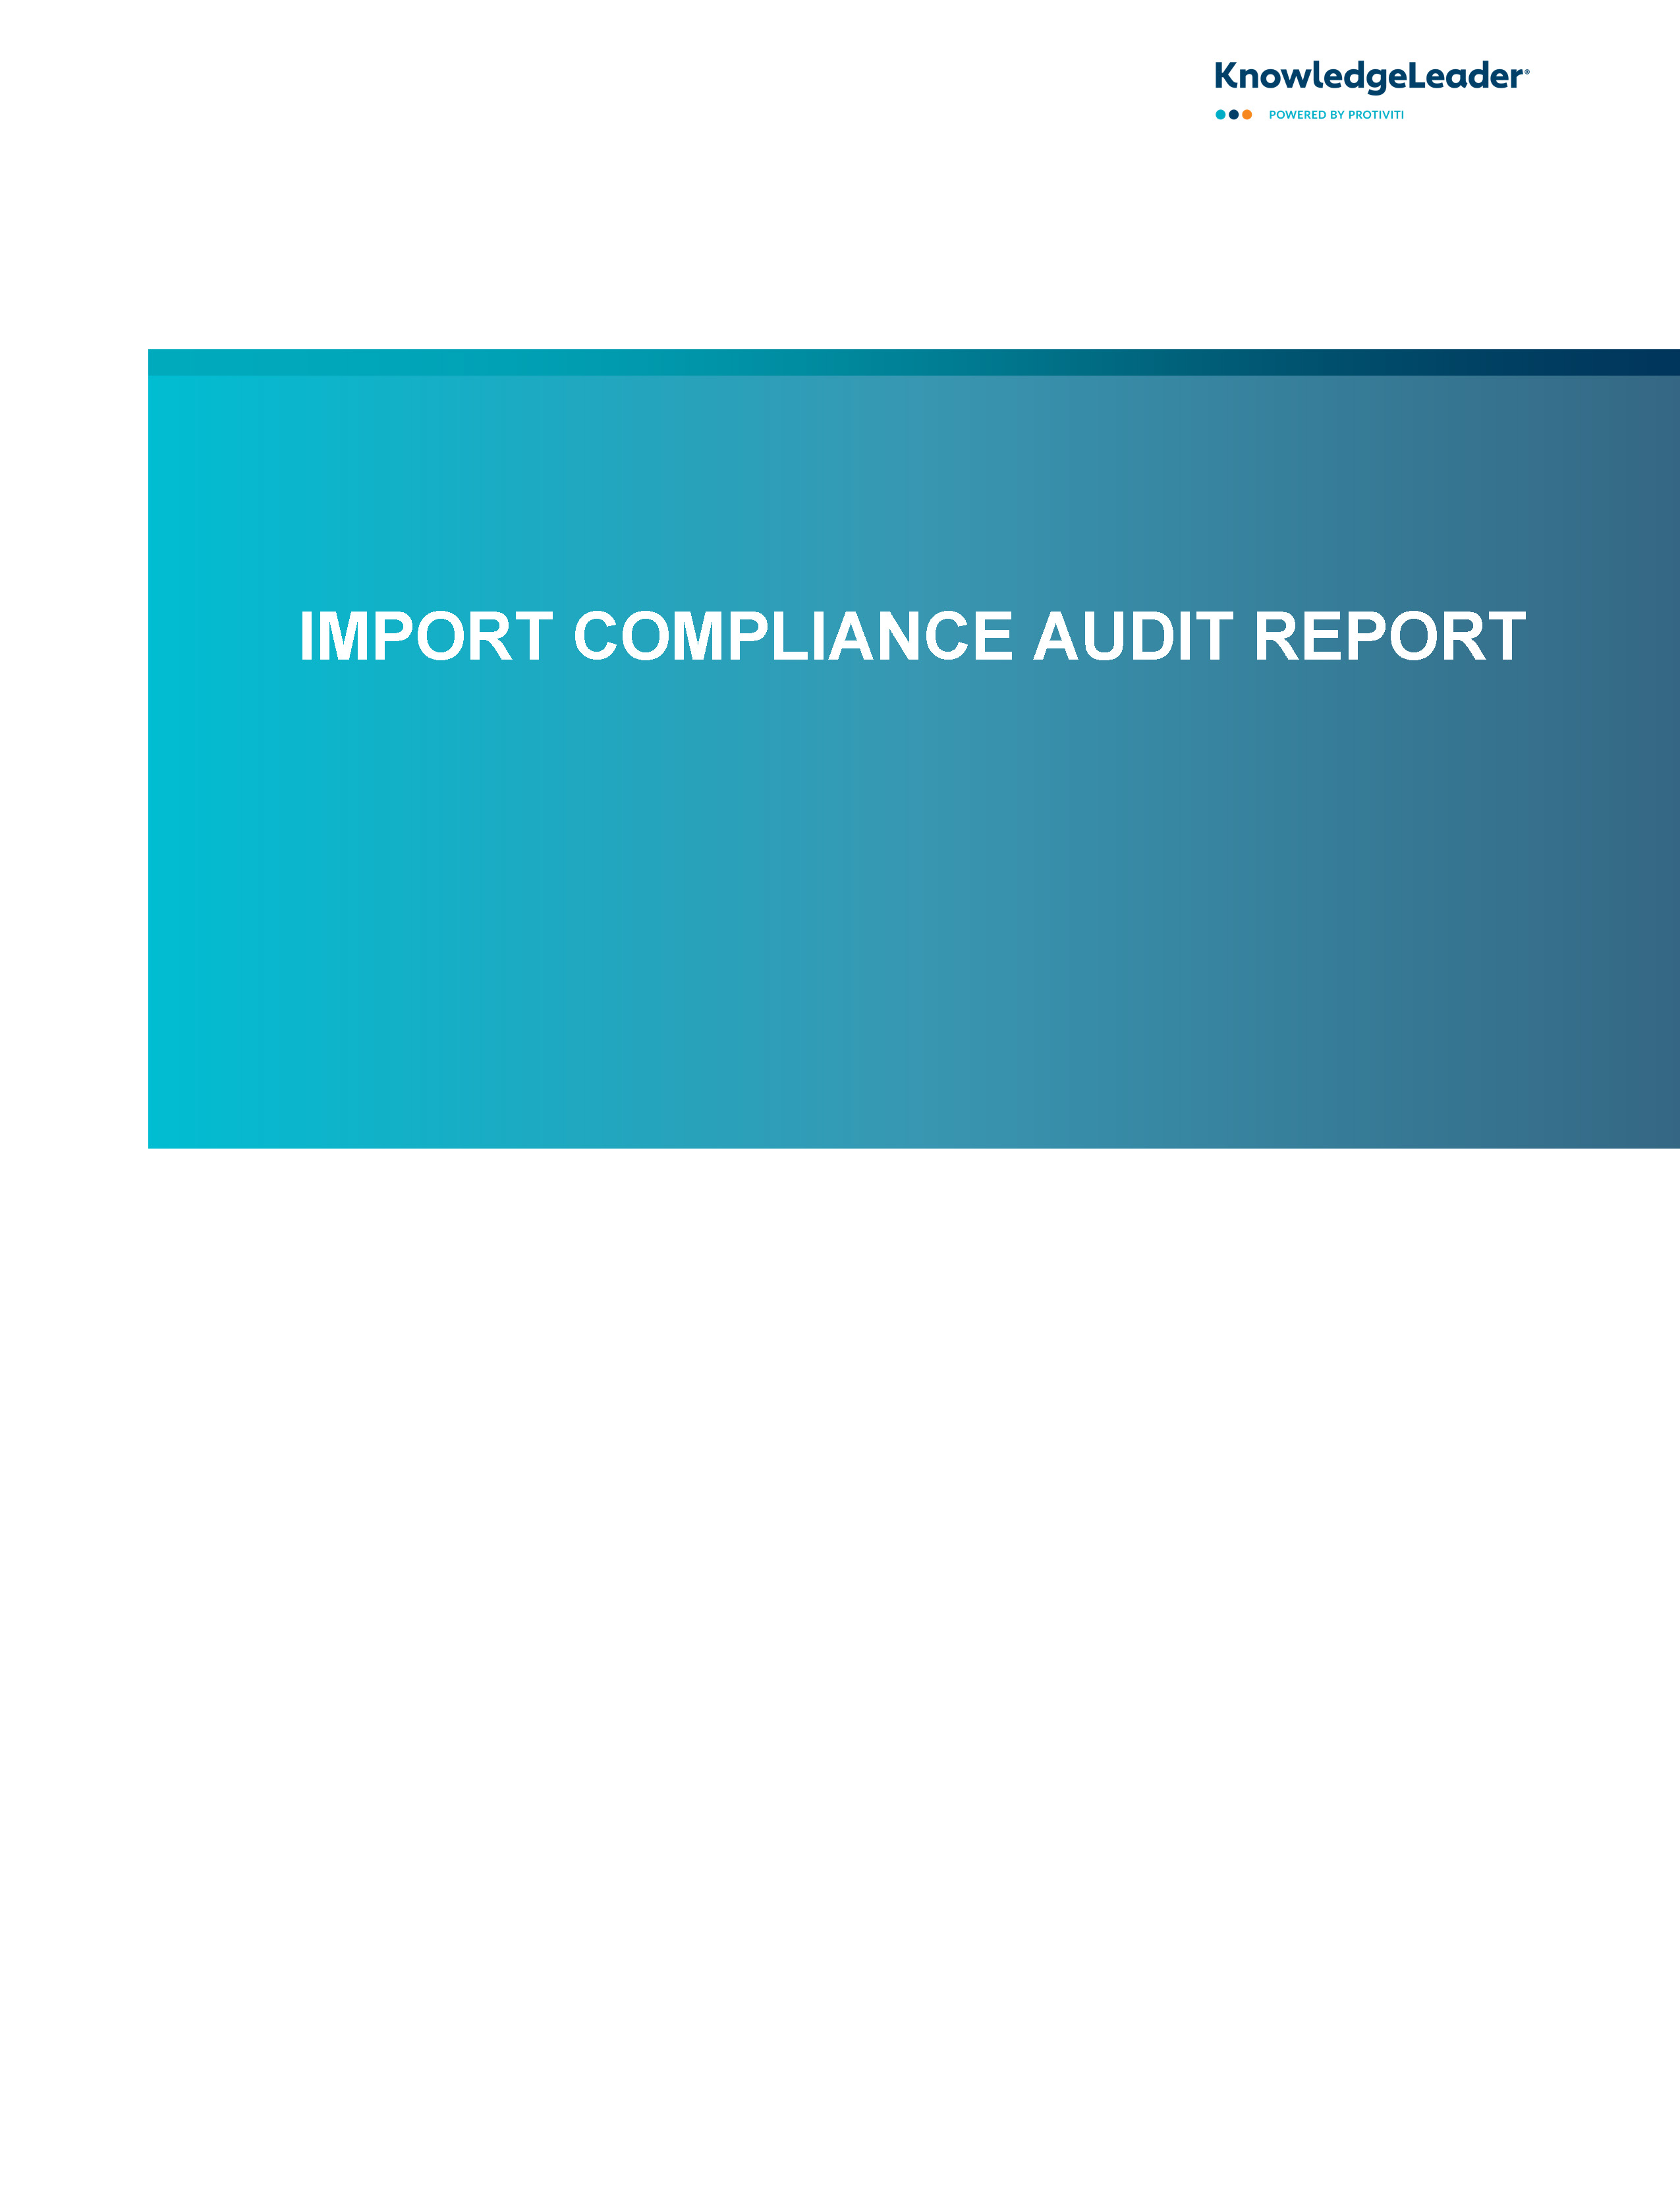 Screenshot of the first page of Import Compliance Audit Report